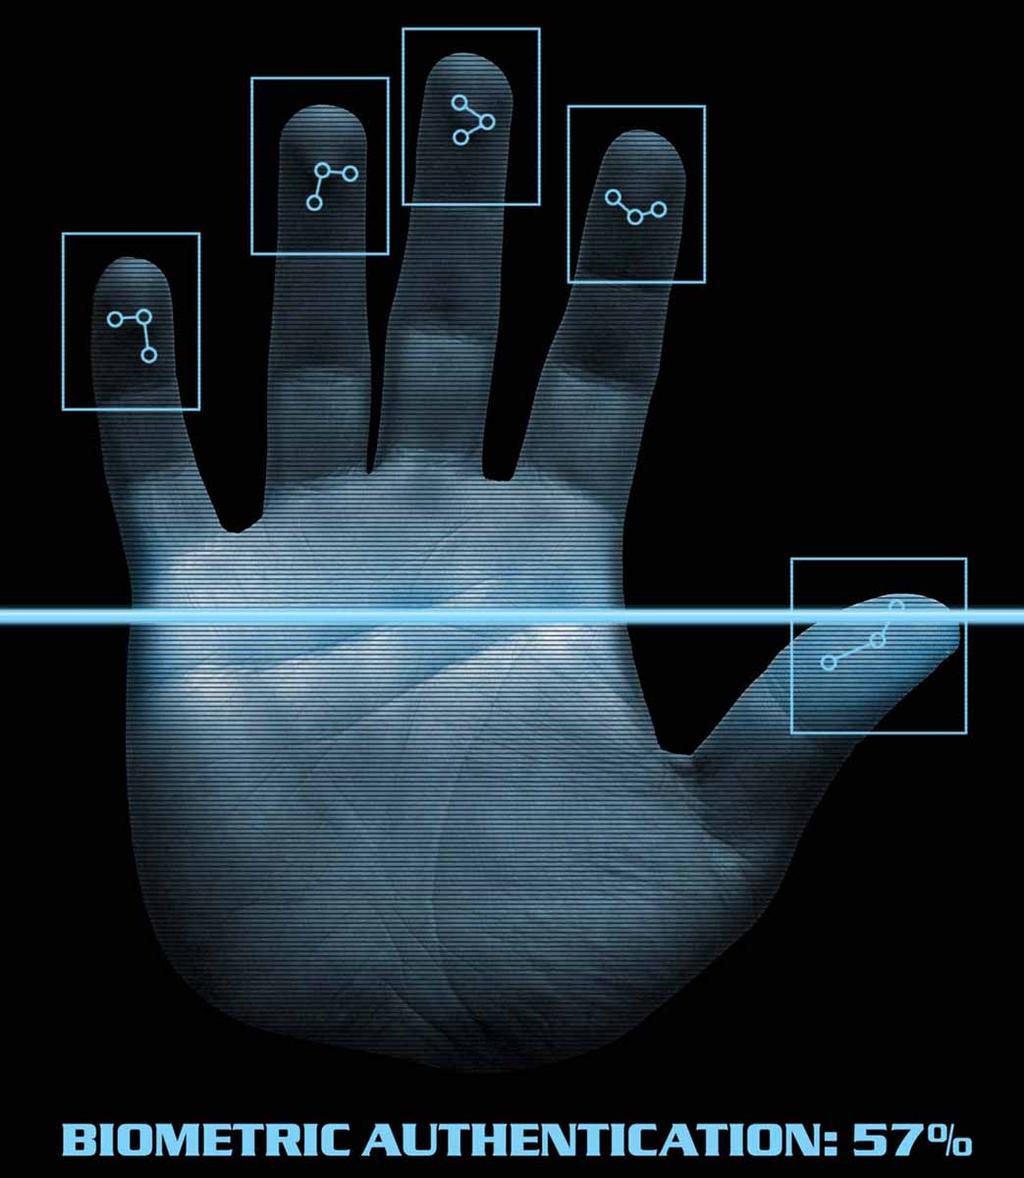 Access control systems use biometric analytics such as fingerprint recognition, face detection and iris